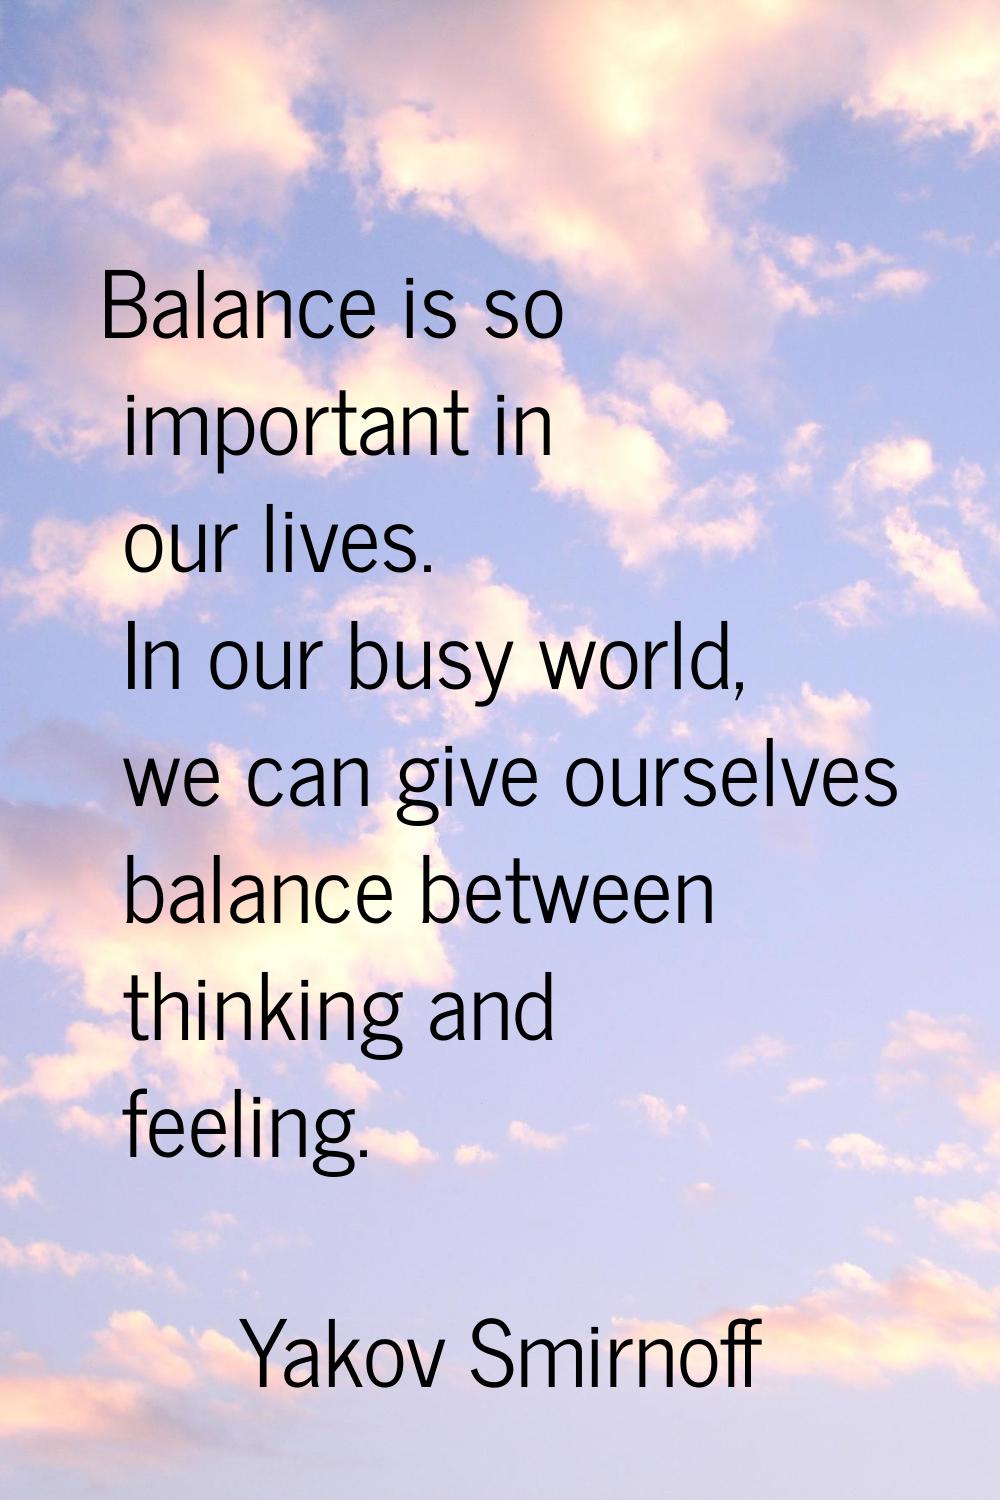 Balance is so important in our lives. In our busy world, we can give ourselves balance between thin